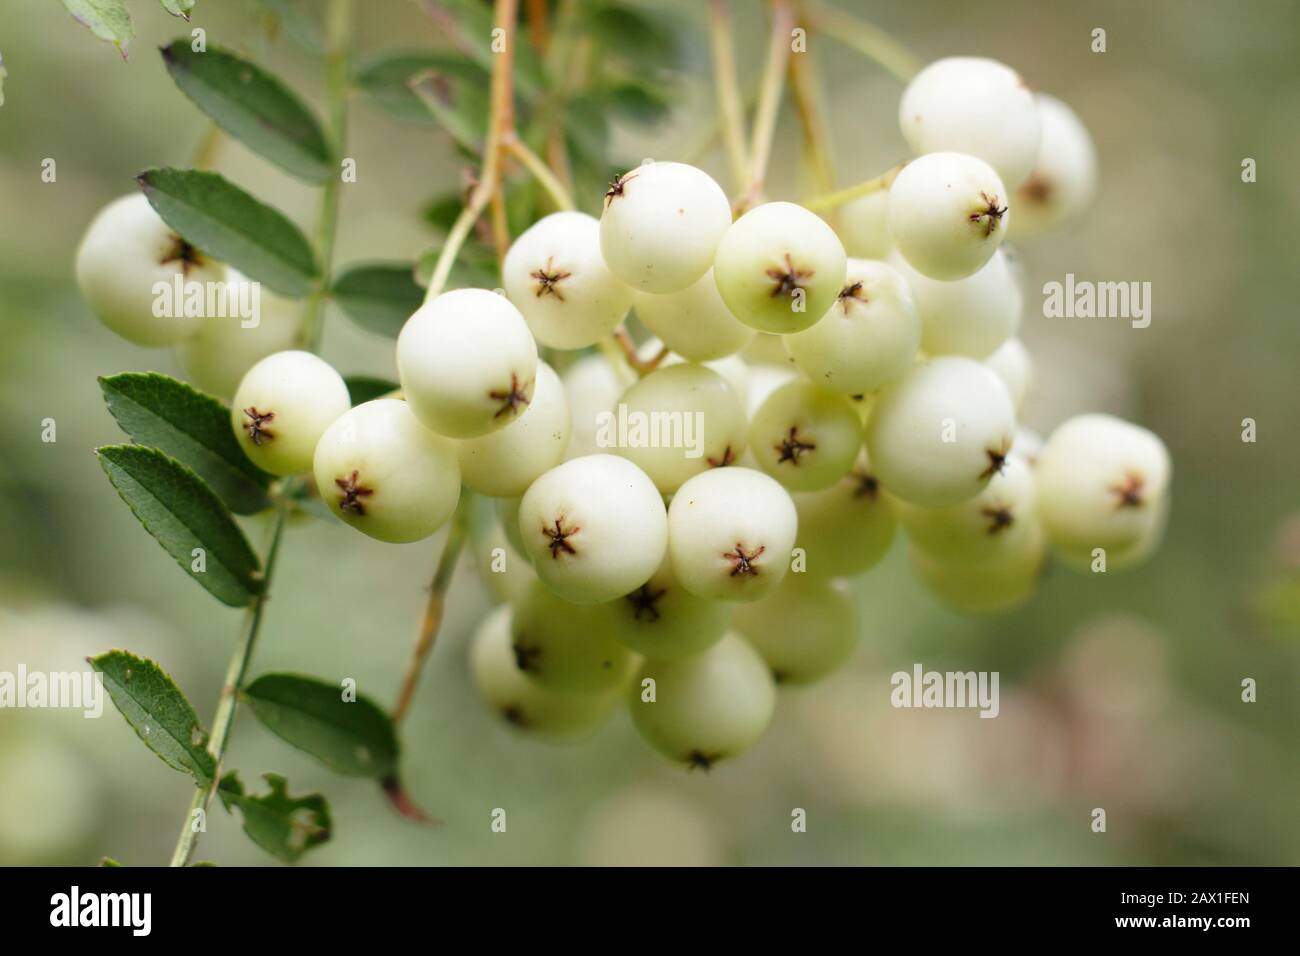 Sorbus 'Harry Smith' rowan berries. Mountain ash 'Harry Smith' tree displaying clusters of white berries in early autumn. UK Stock Photo